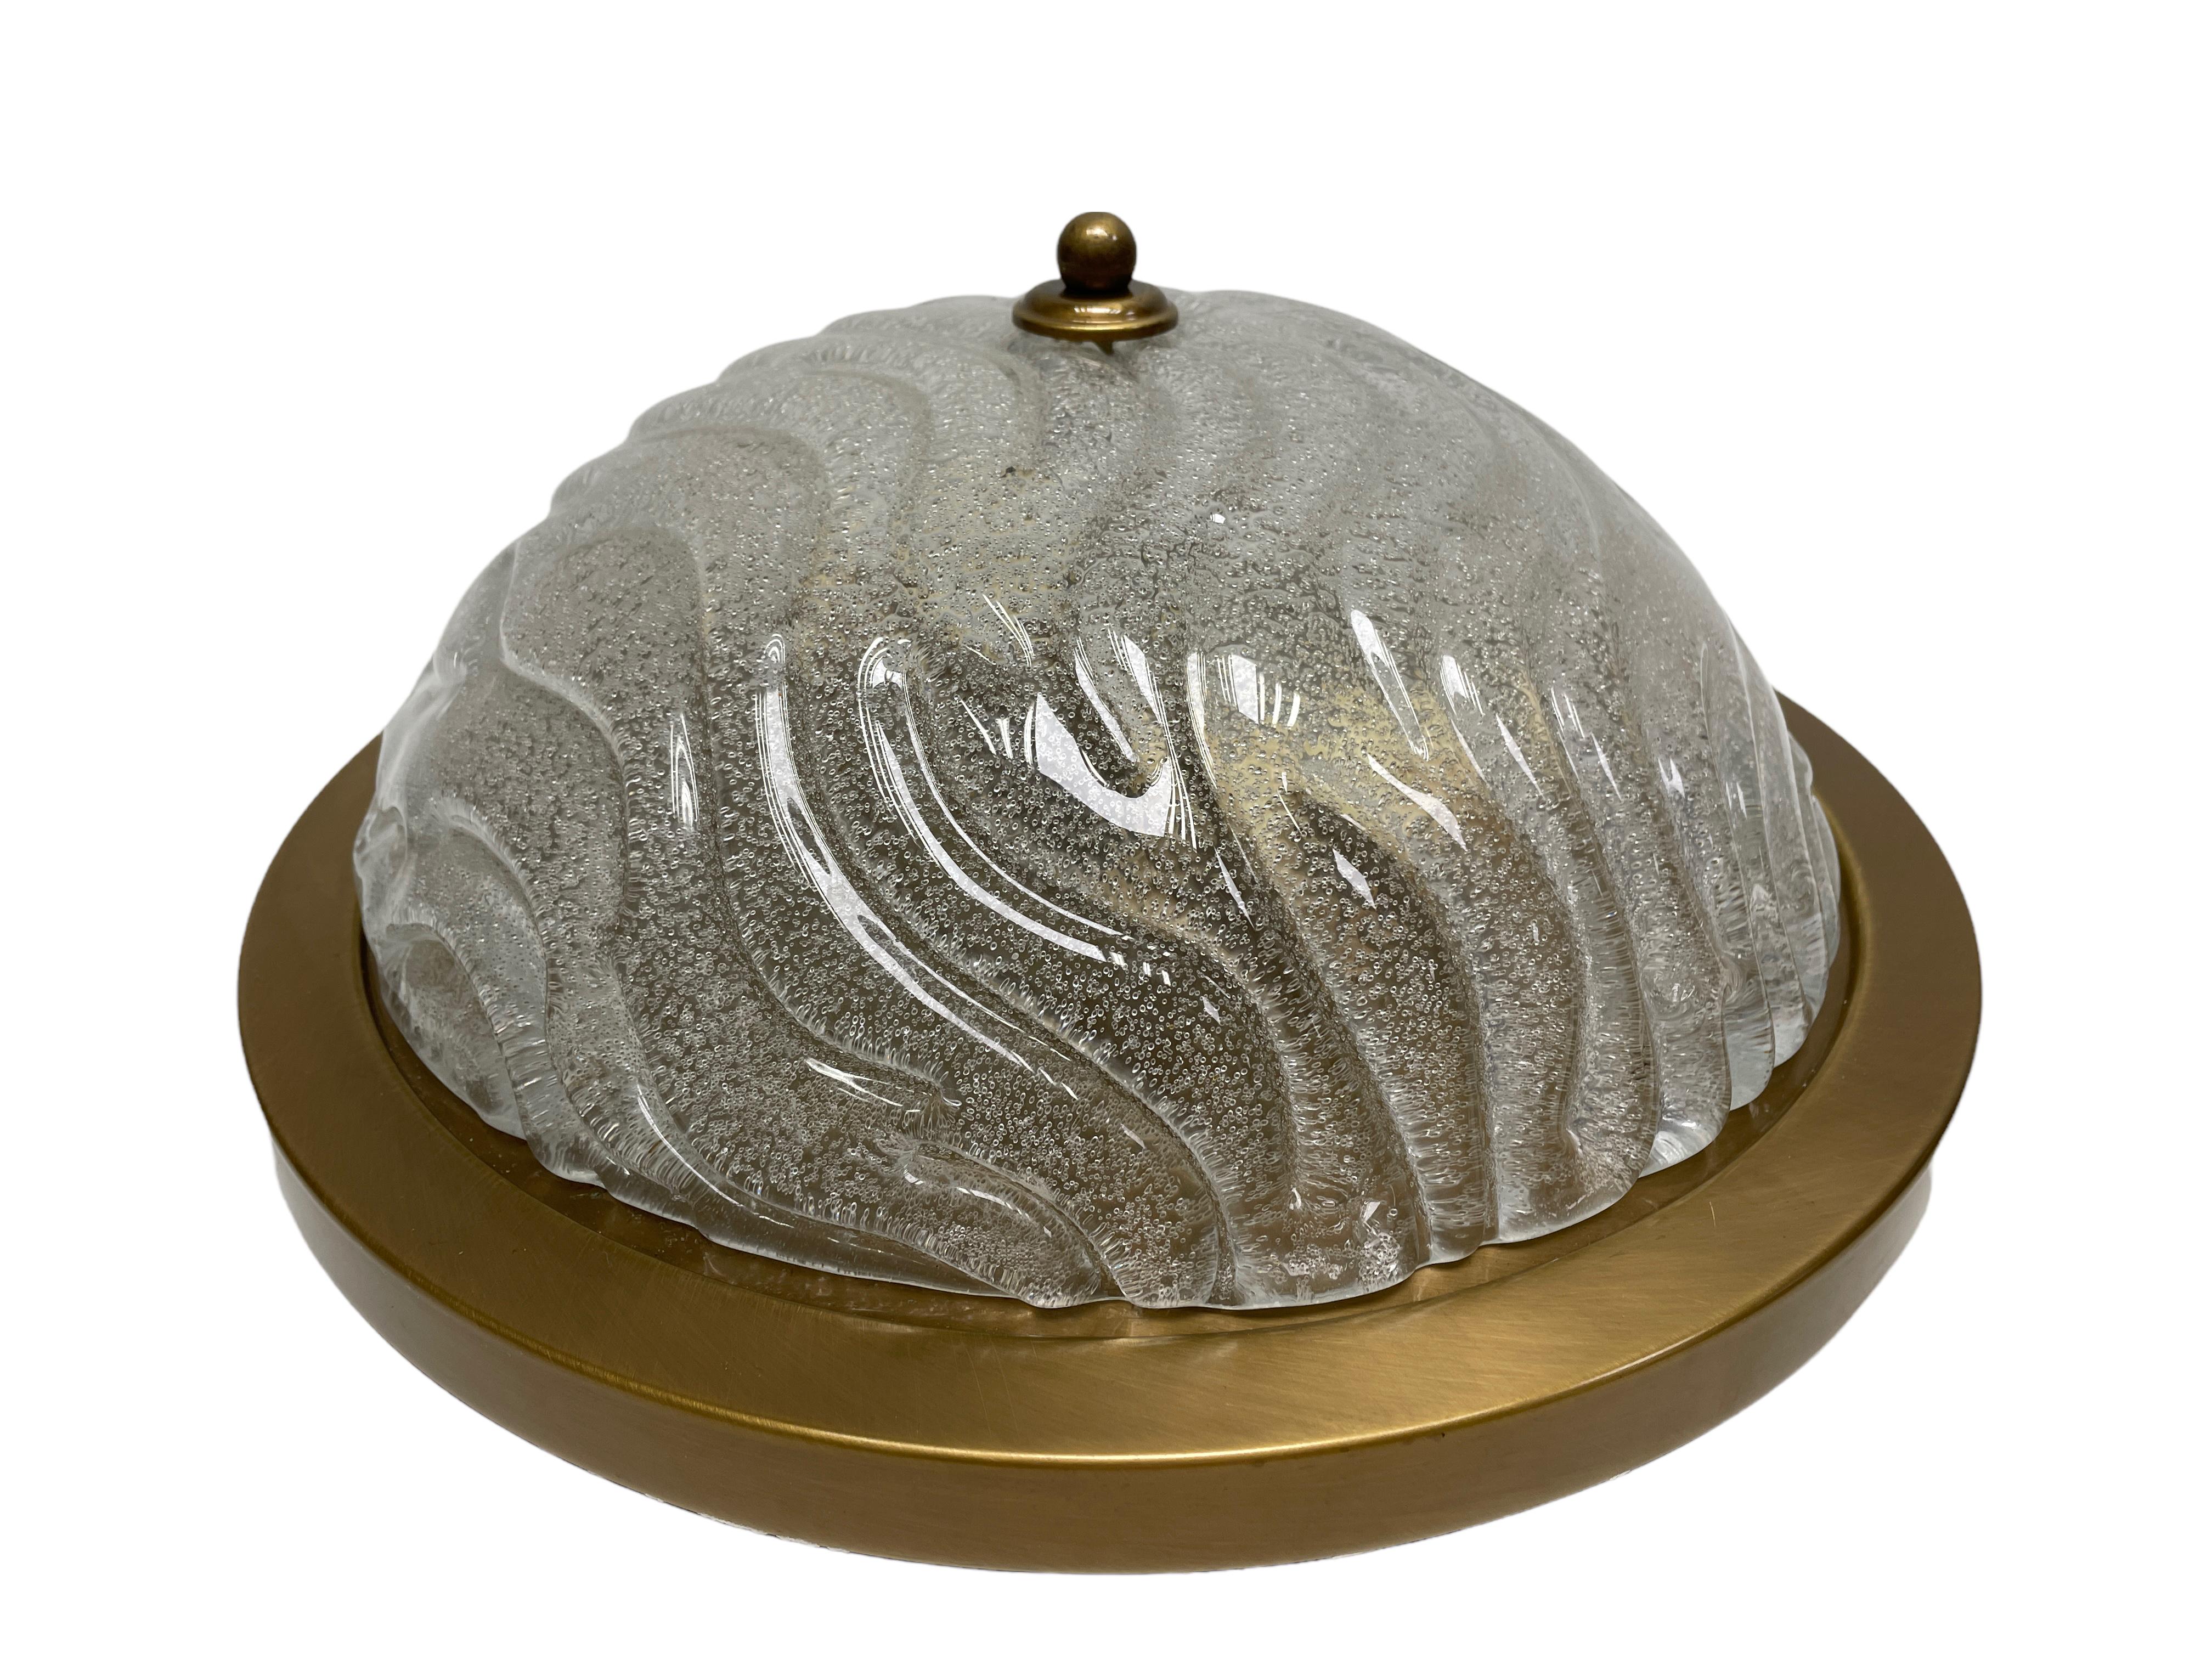 A beautiful large flush mount by German manufacturer Fischer Leuchten. The large heavy glass element is supported by a burnished brass plate with two light sources. Beautiful wave clear glass on a metal fixture. The Fixture requires two European E27